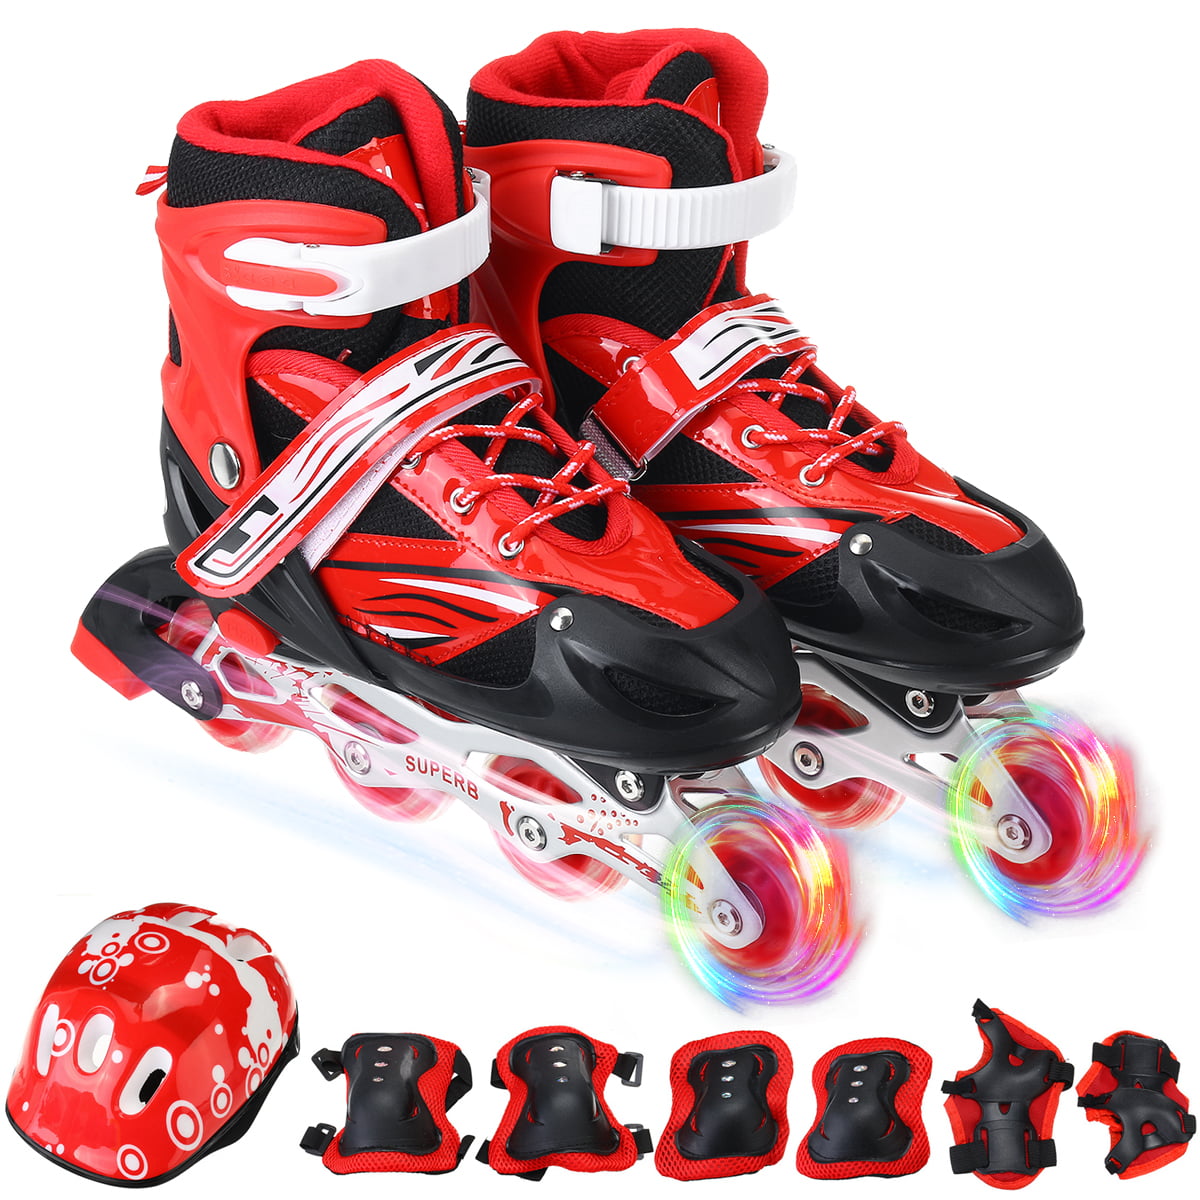 Renewed Kids Adjustable Inline Skates Outdoor Durable Perfect First Skates for Girls and Boys Illuminating Front Wheels 